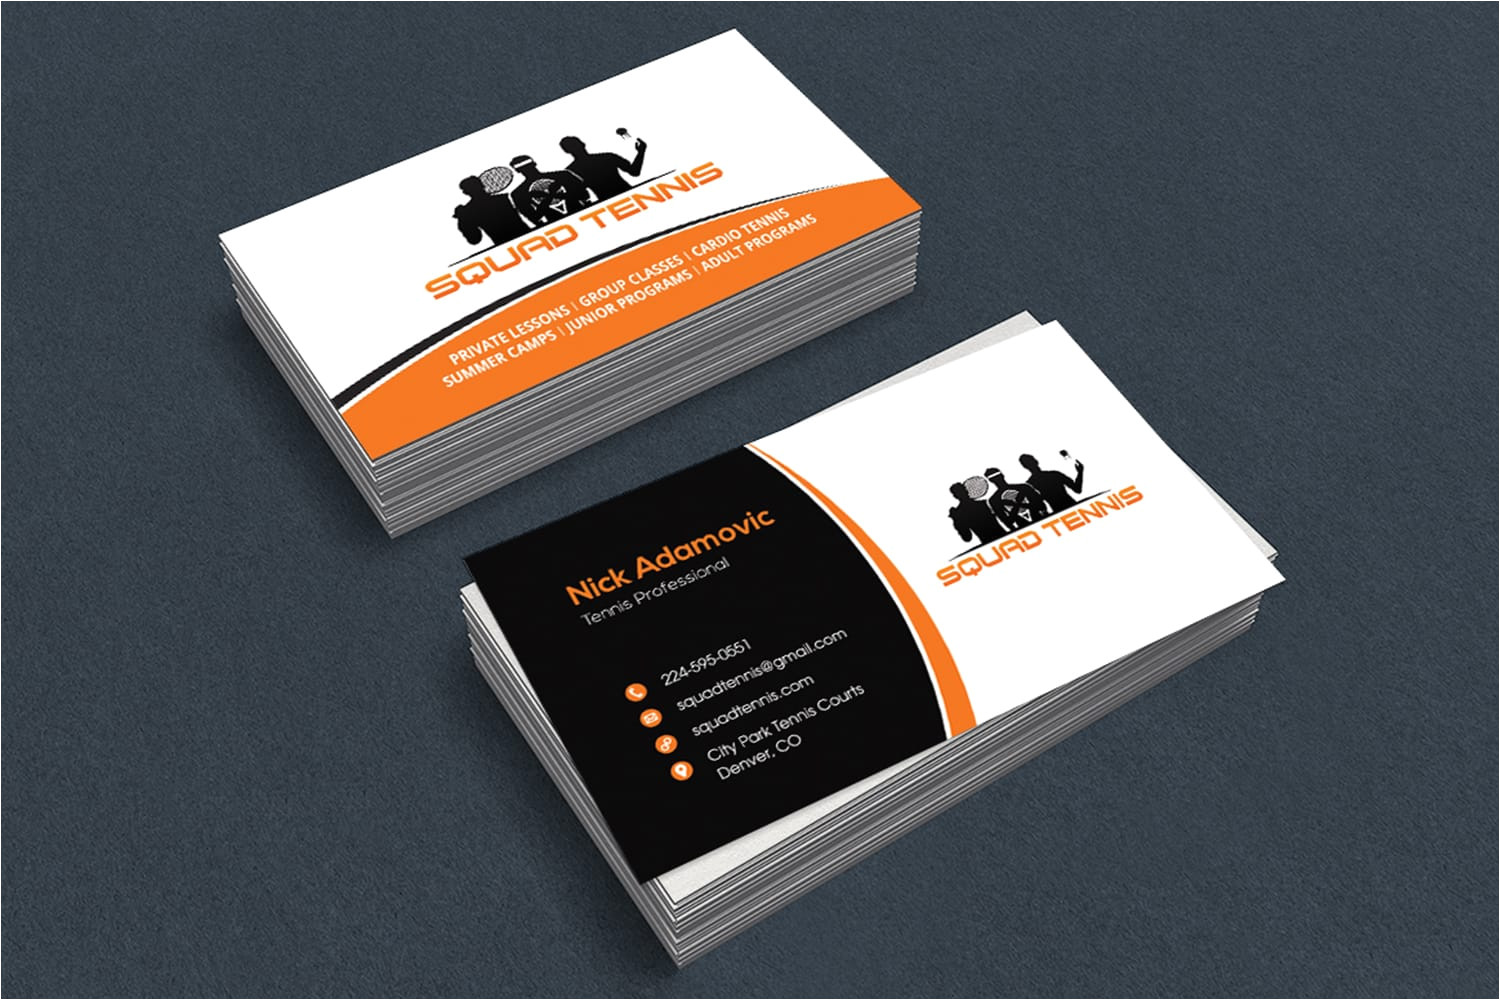 Design Your Own Business Card Free Design Stunning Business Cards within 24 Hours